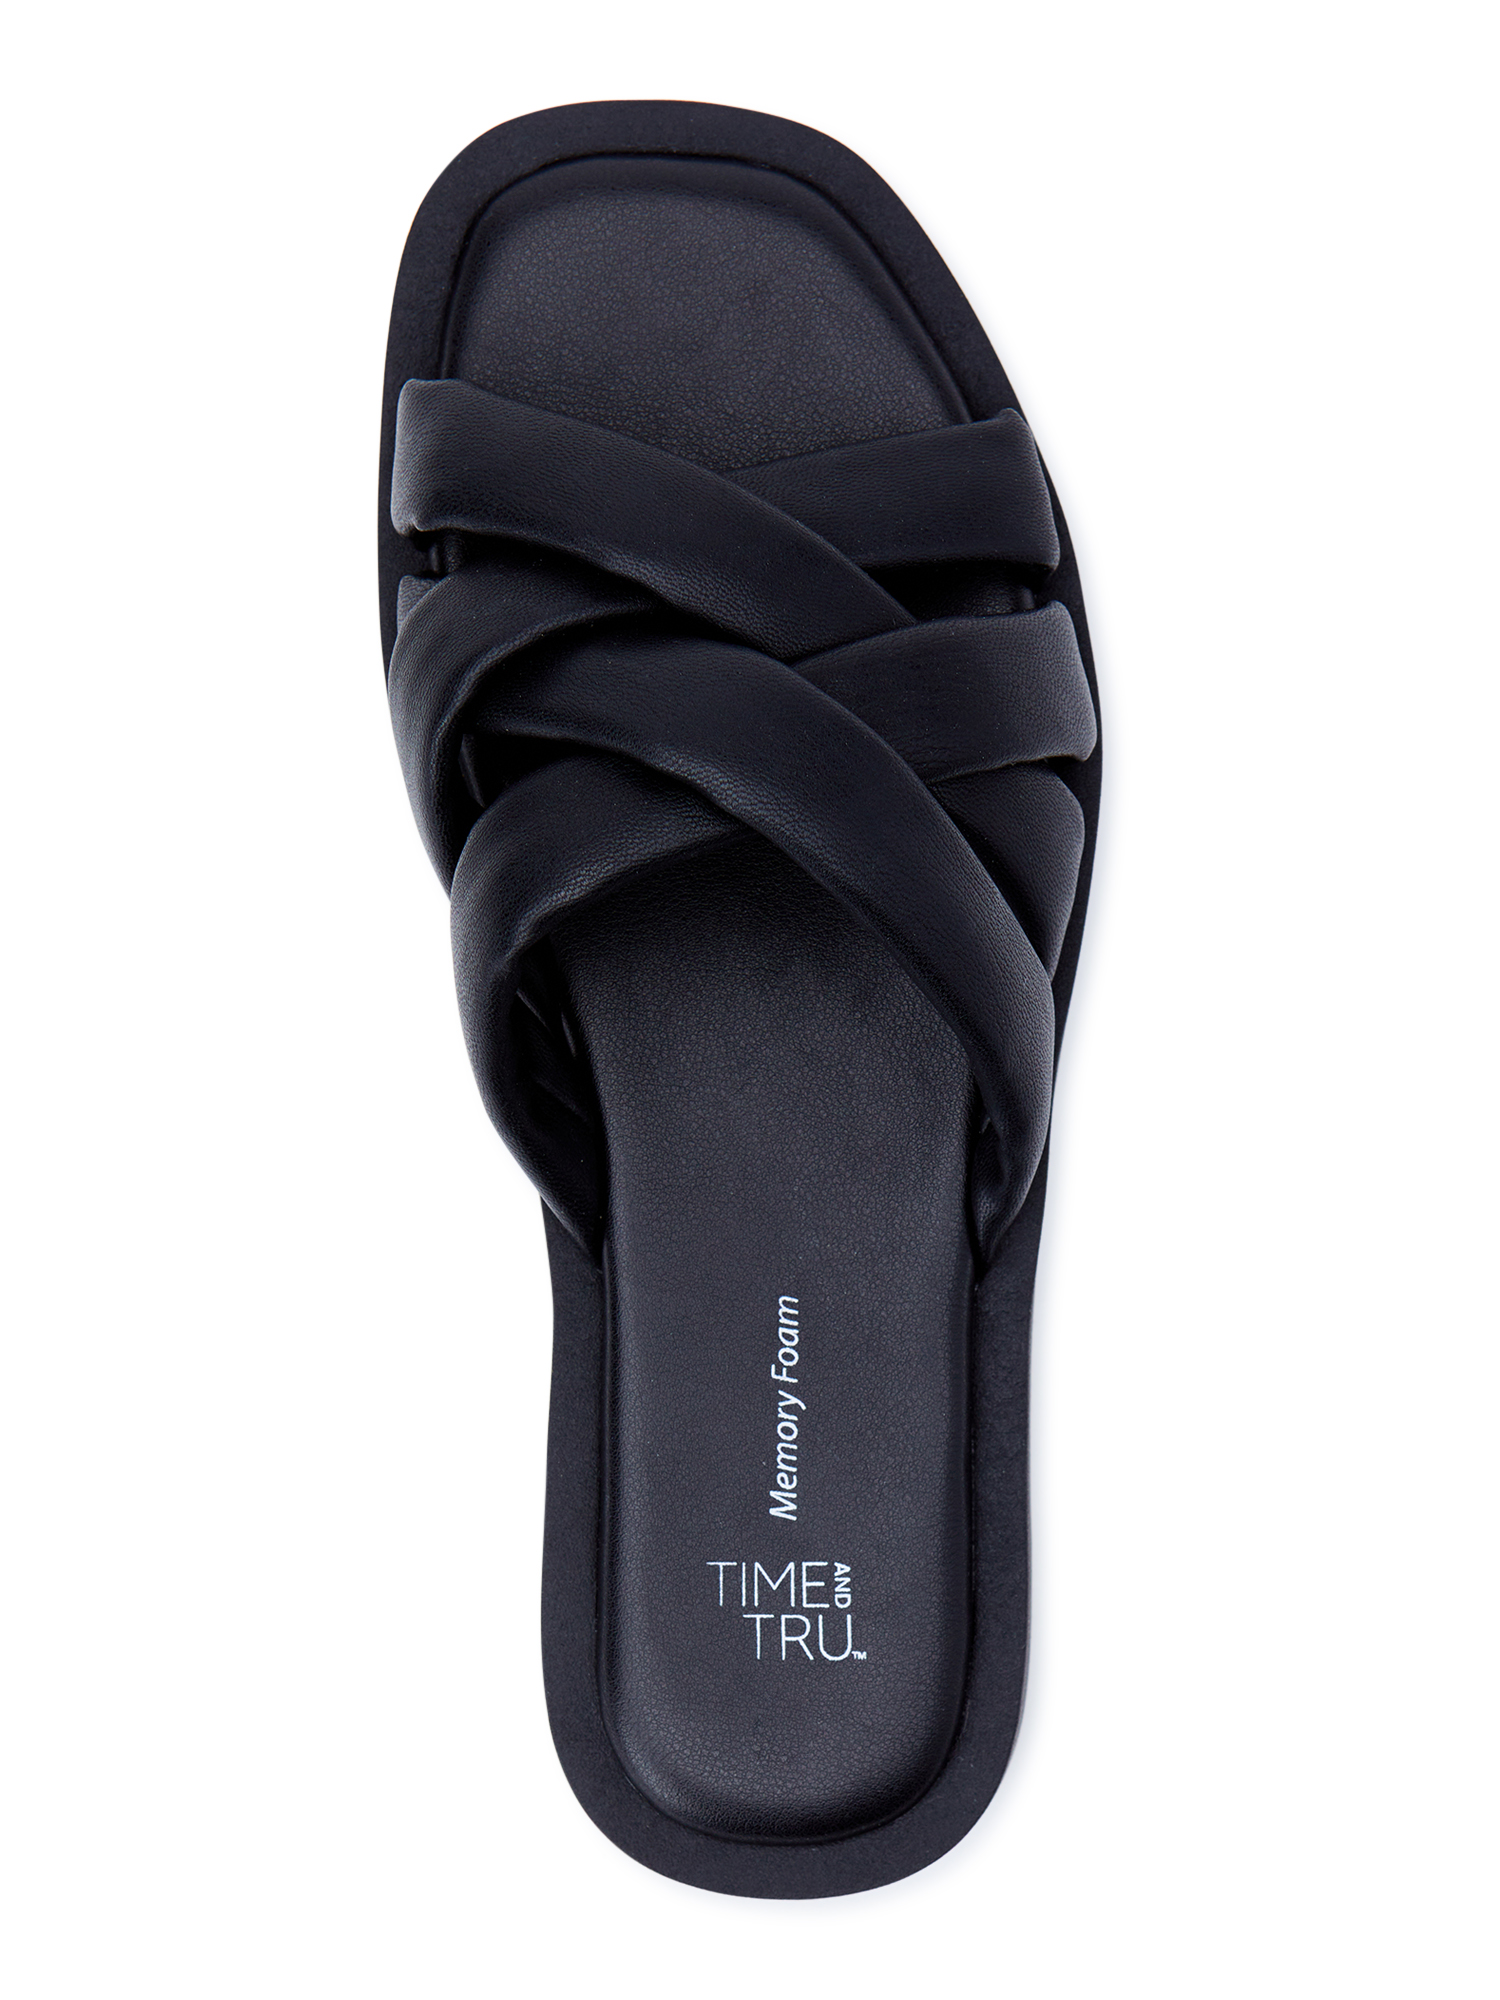 Time and Tru Women's Xband Demi Wedge Sandal - image 5 of 5